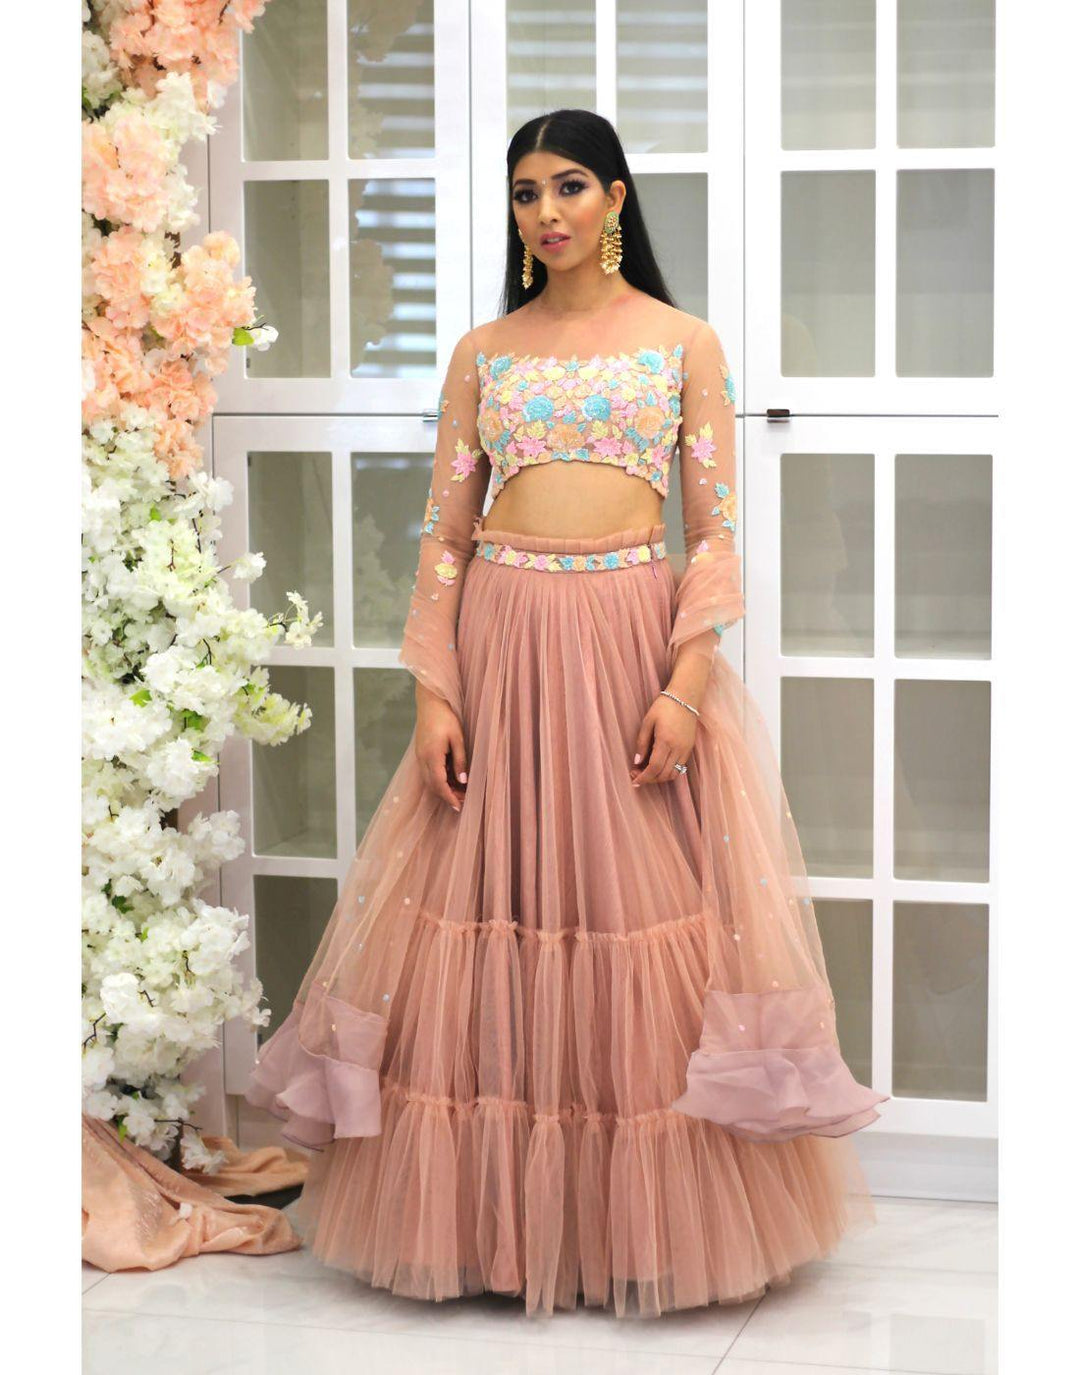 How to Make 6 Frill lehenga/skirt with Can Can in 10 minutes Reuse